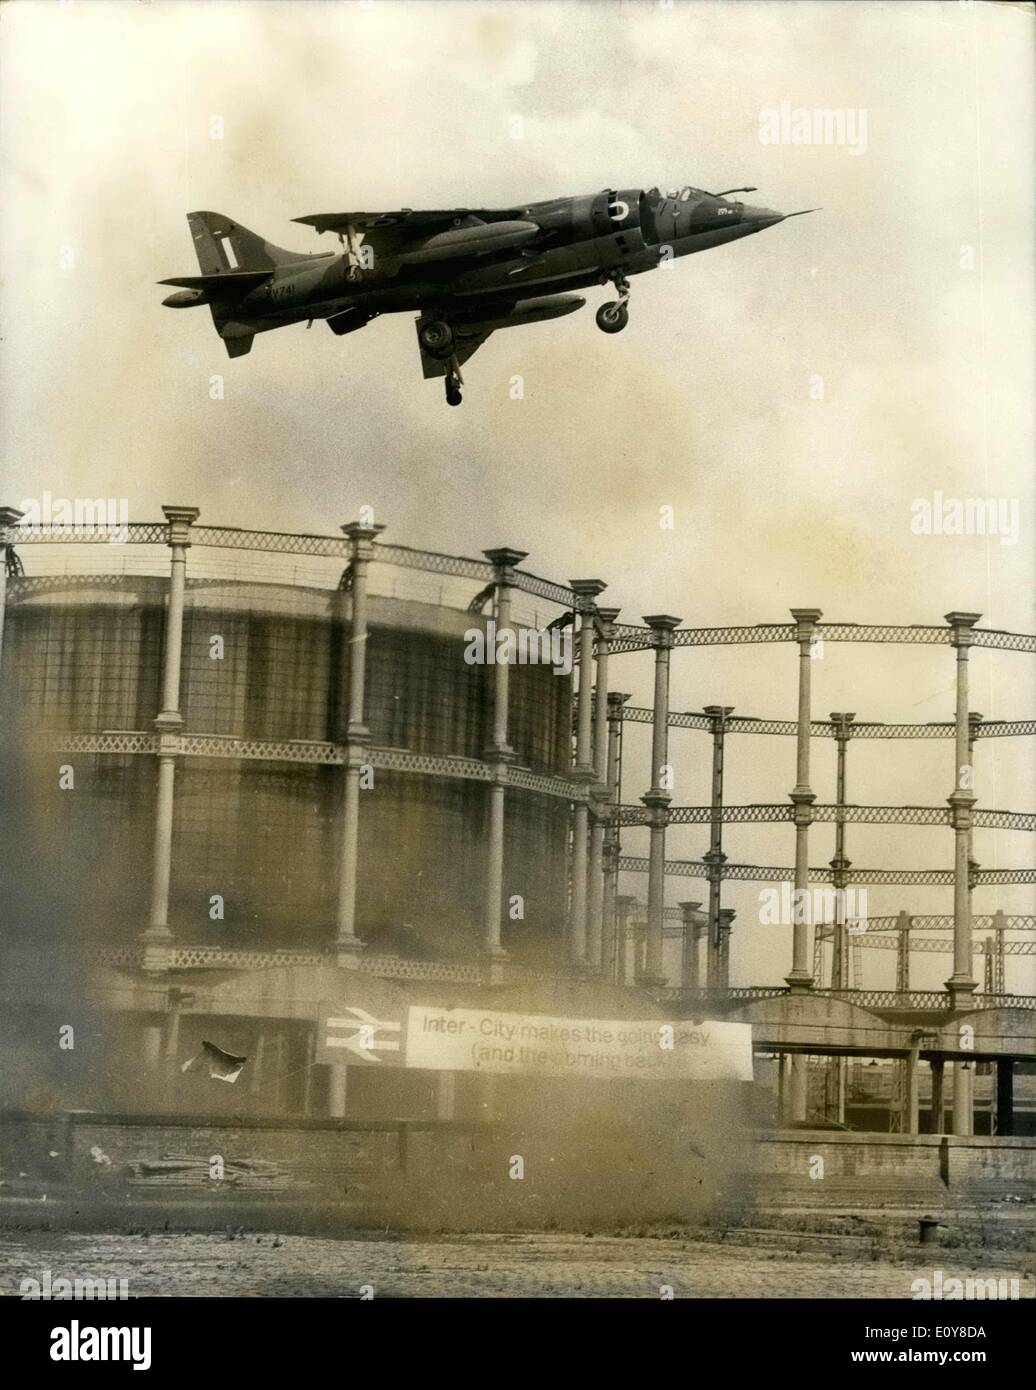 May 03, 1969 - R.A.F. Makes first Ever Landing In London with Fix- Wing Jet: The First landing in the heart of London by a fixed -wing jet aircraft was made today when a Royal air Force Harrier GRI landed vertically on a specially prepared ''pad'' at at Somers Town high, in St. Pancras. The Hawker Siddeley ''Jump-jet'' Harrier, piloted by Squadron -Leader Tom Lecky- Thompson, 34, of Salisbury, Wilts, Landed at comers Town High, a discussed coal-yard near St Stock Photo